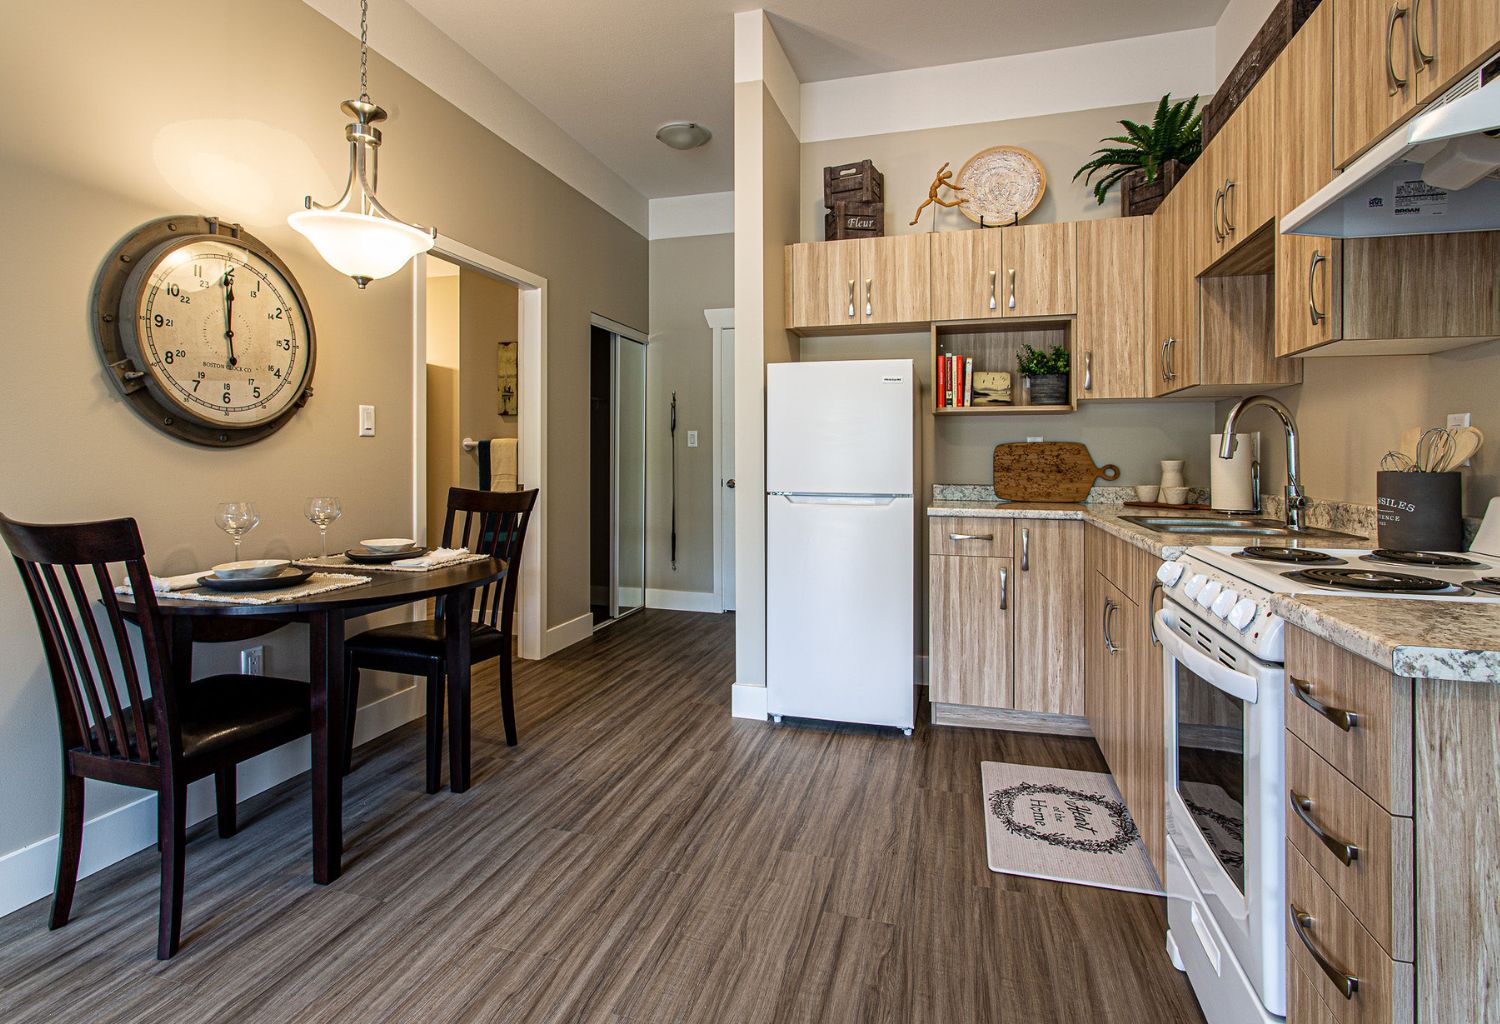 Interior view of the kitchen at Tipton Place - Inclusive Housing - inclusion powell river